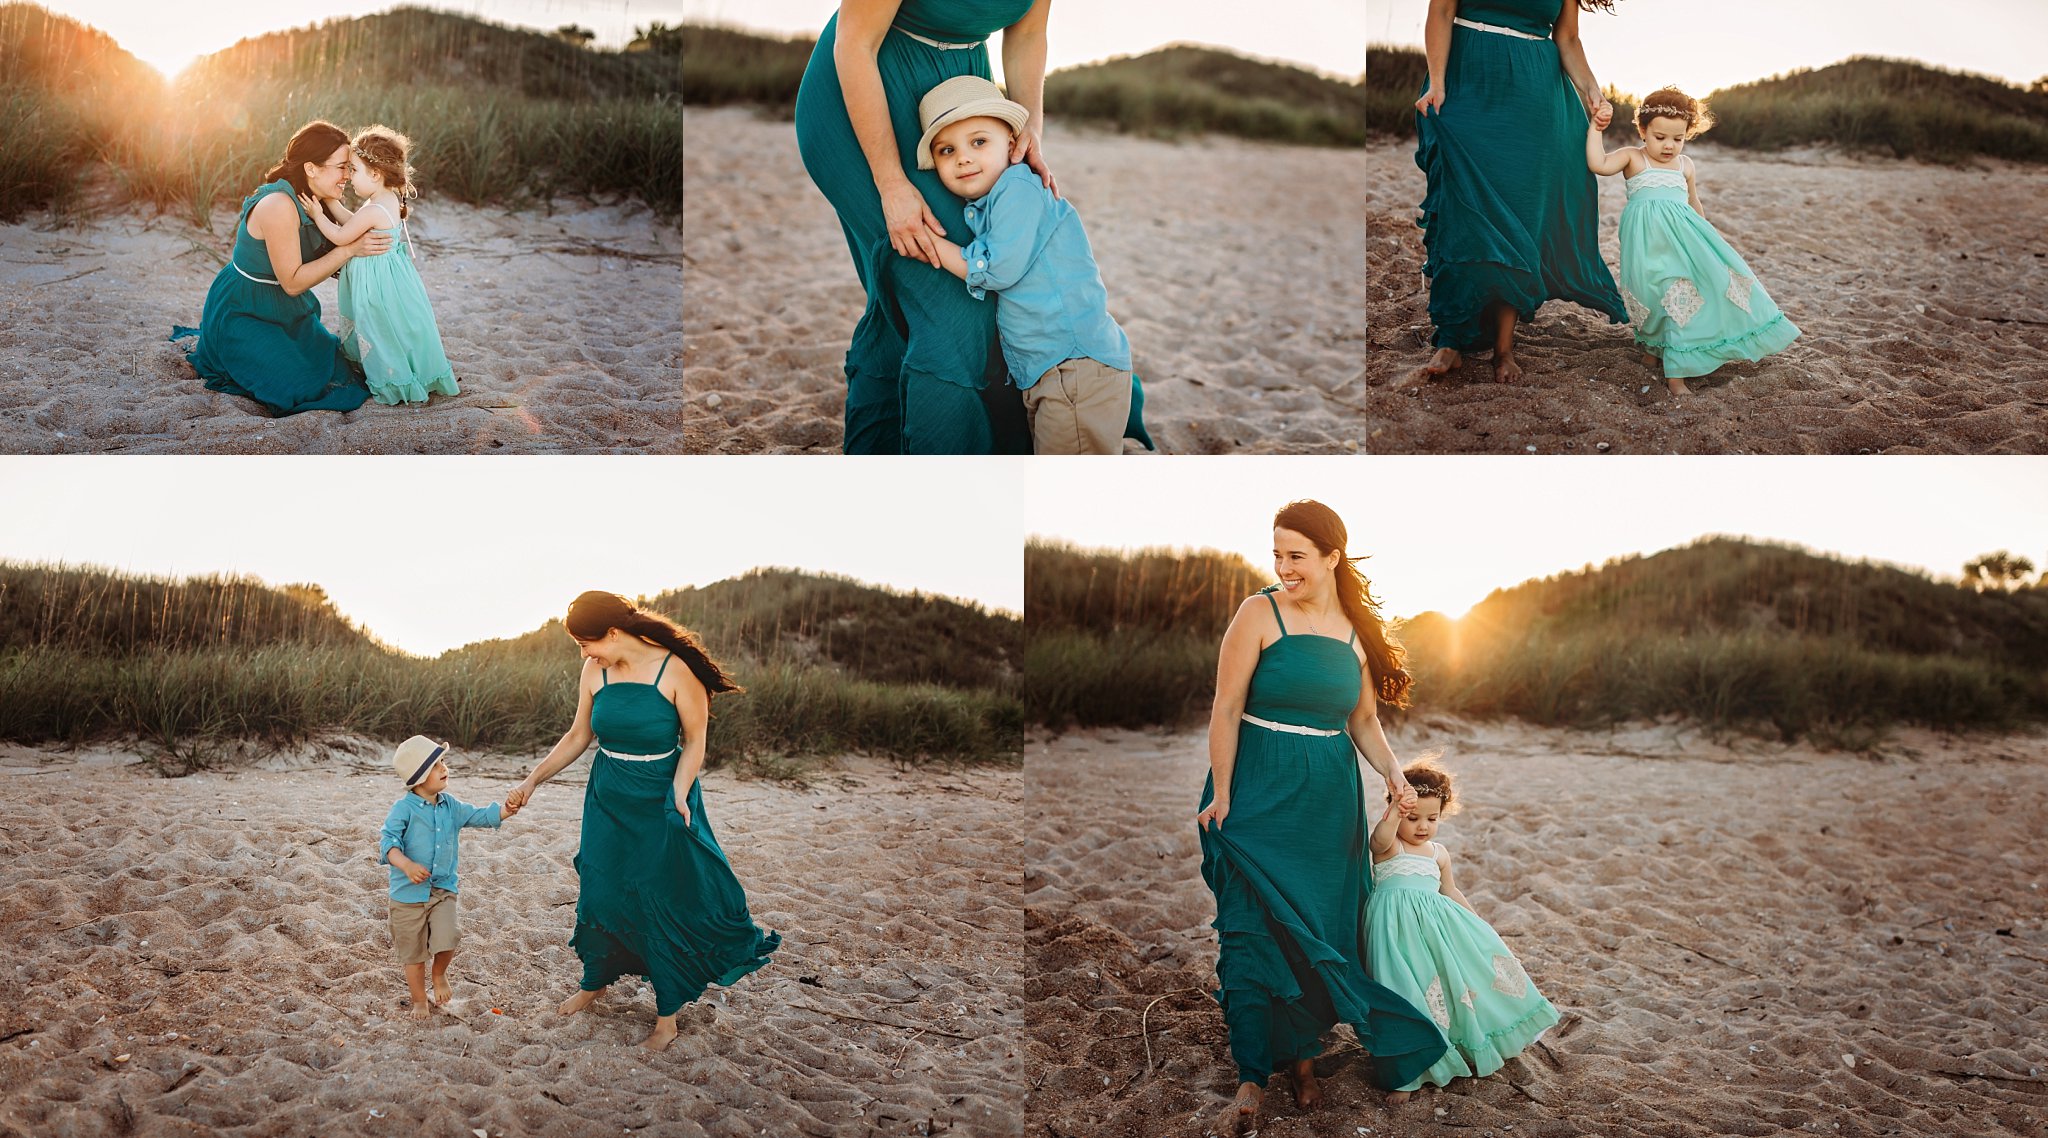 mom in green dress playing with boy girl twins on sunlit beach